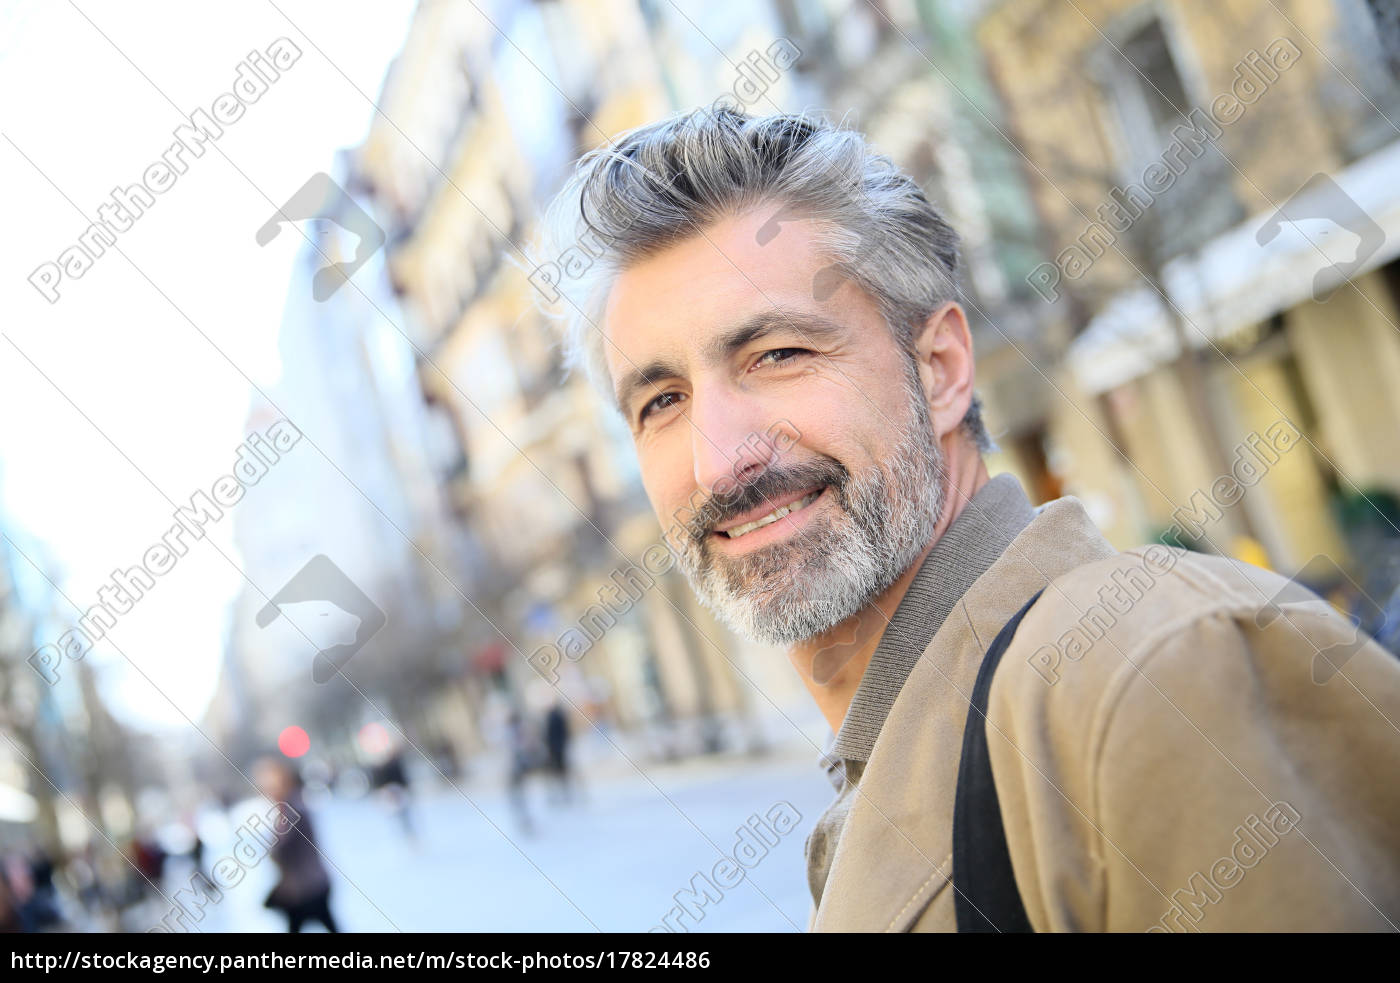 Stock Image 17824486 Handsome Mature Man Walking In Town